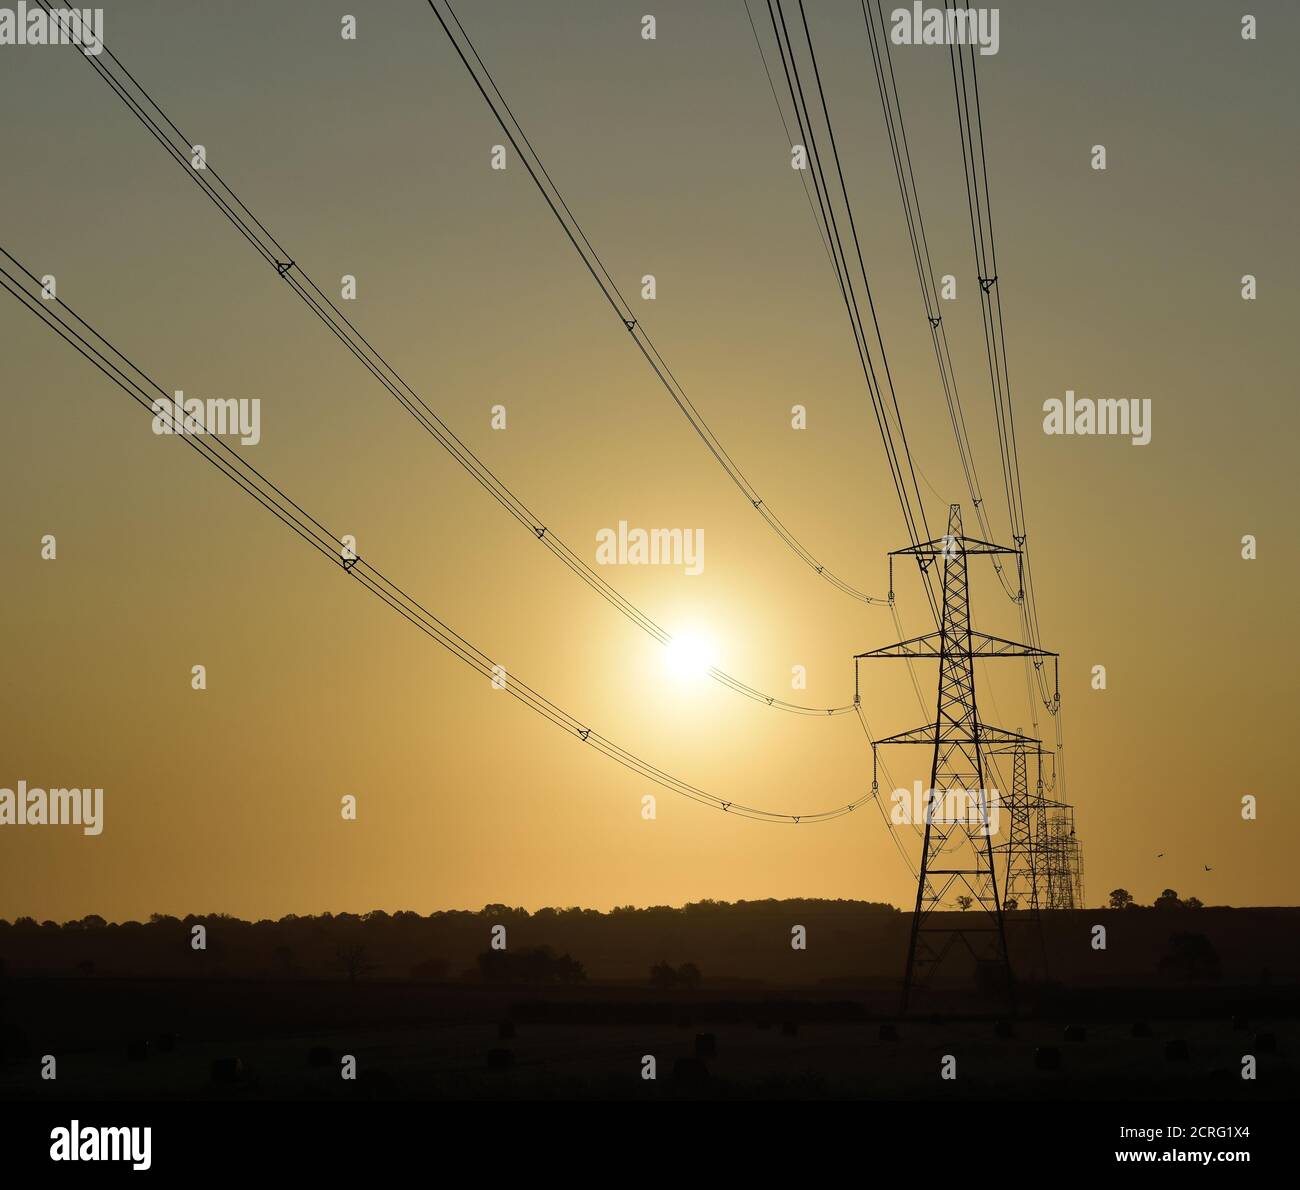 Overhead electric Power lines leading to pylons / towers at sunrise. Stock Photo